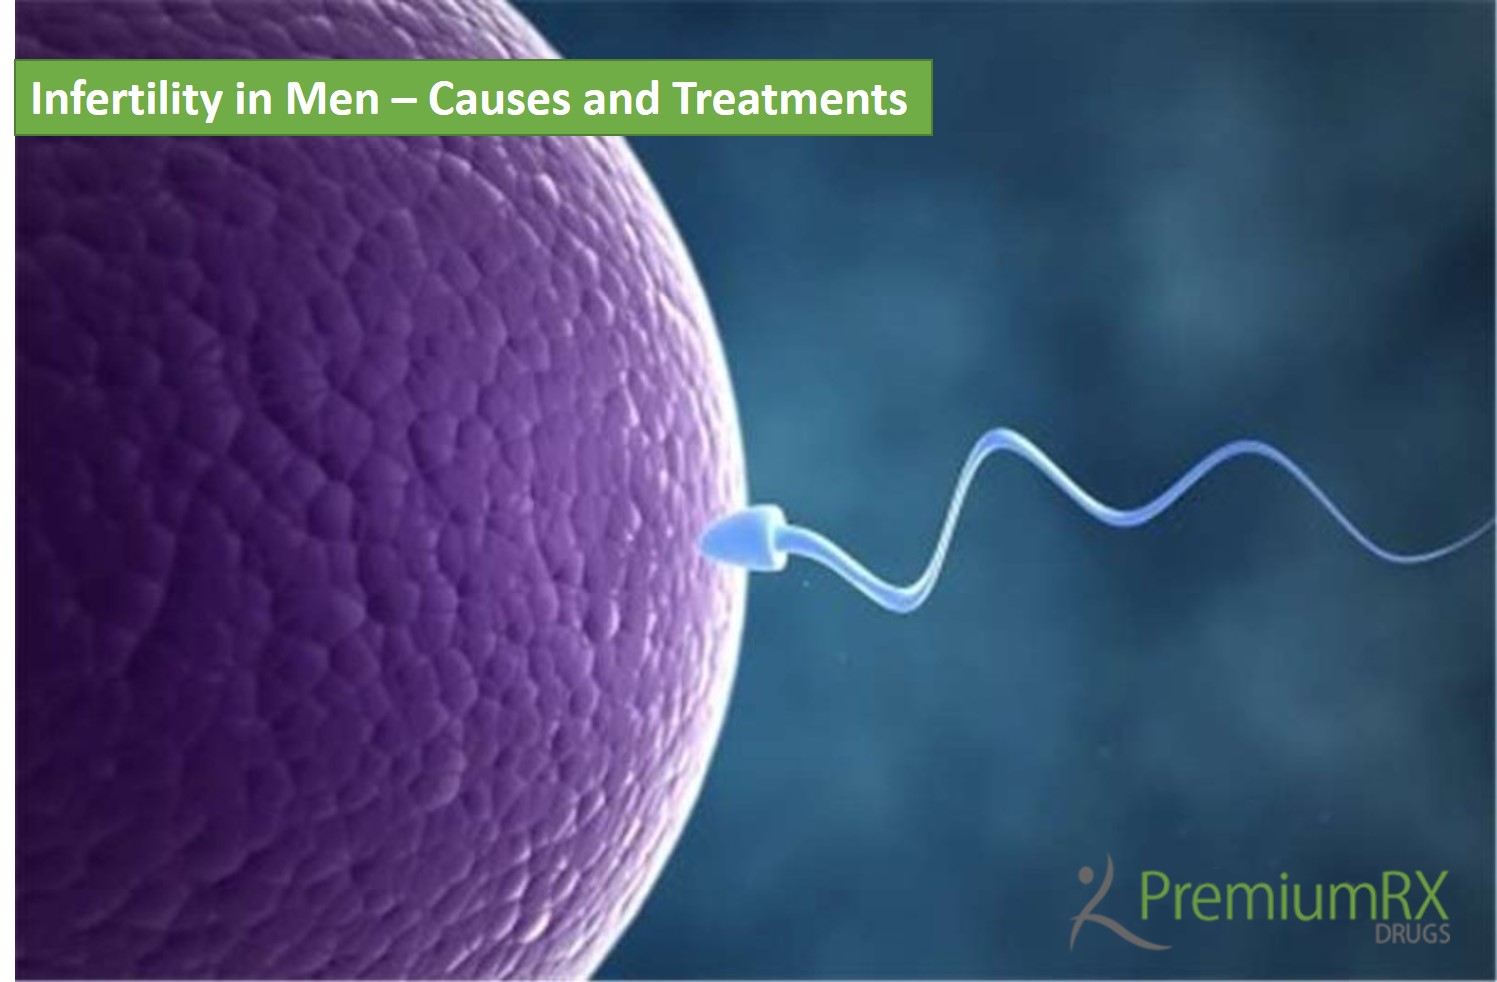 Infertility in Men – Causes and Treatments